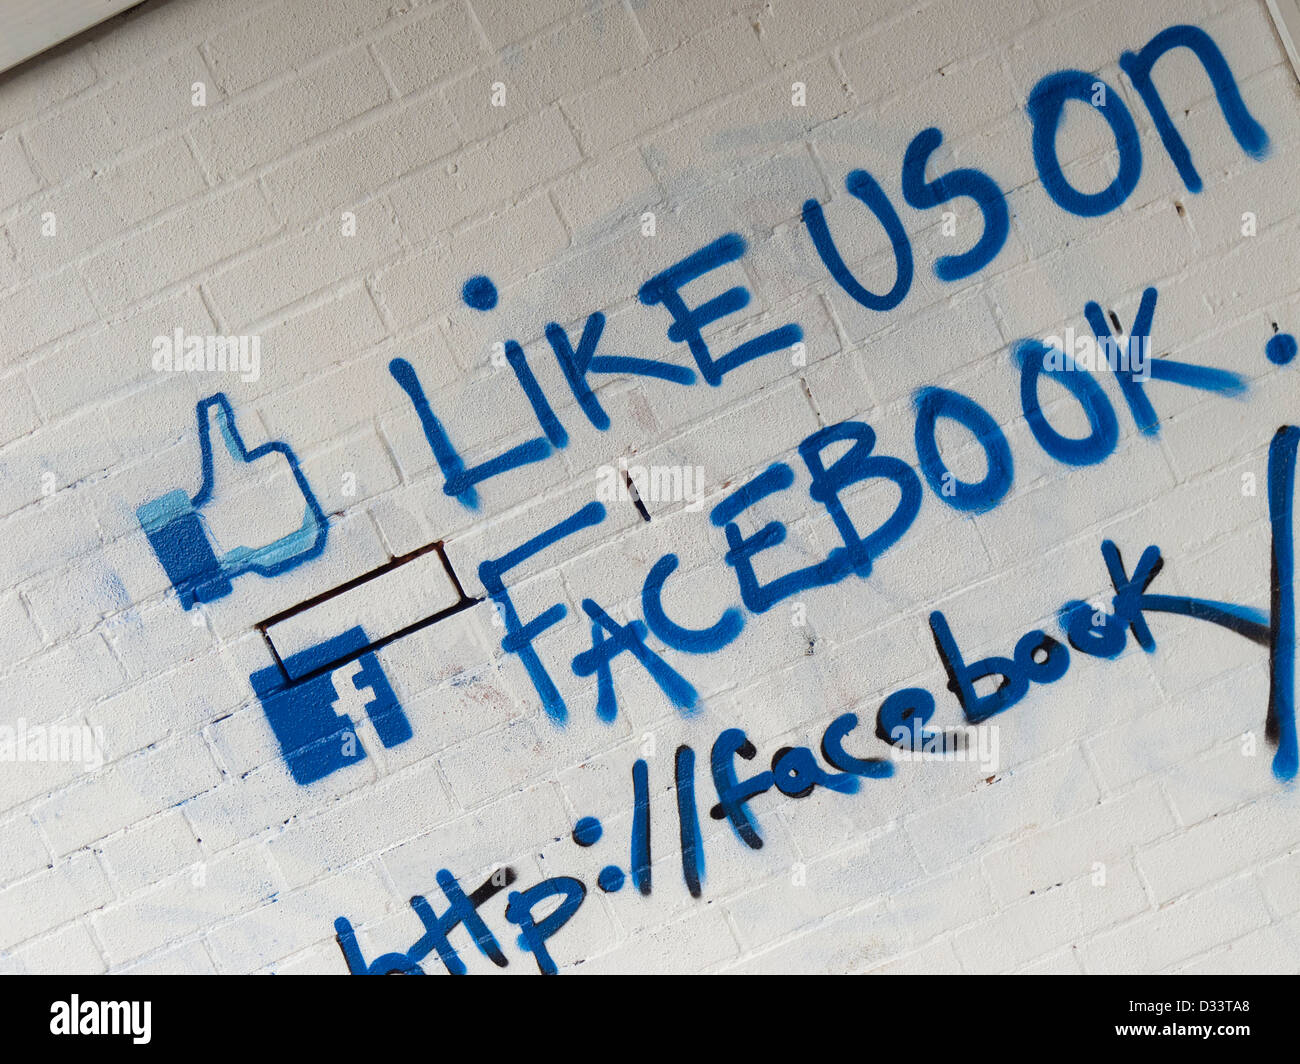 Like us on facebook call to action painted on a brick wall. Stock Photo